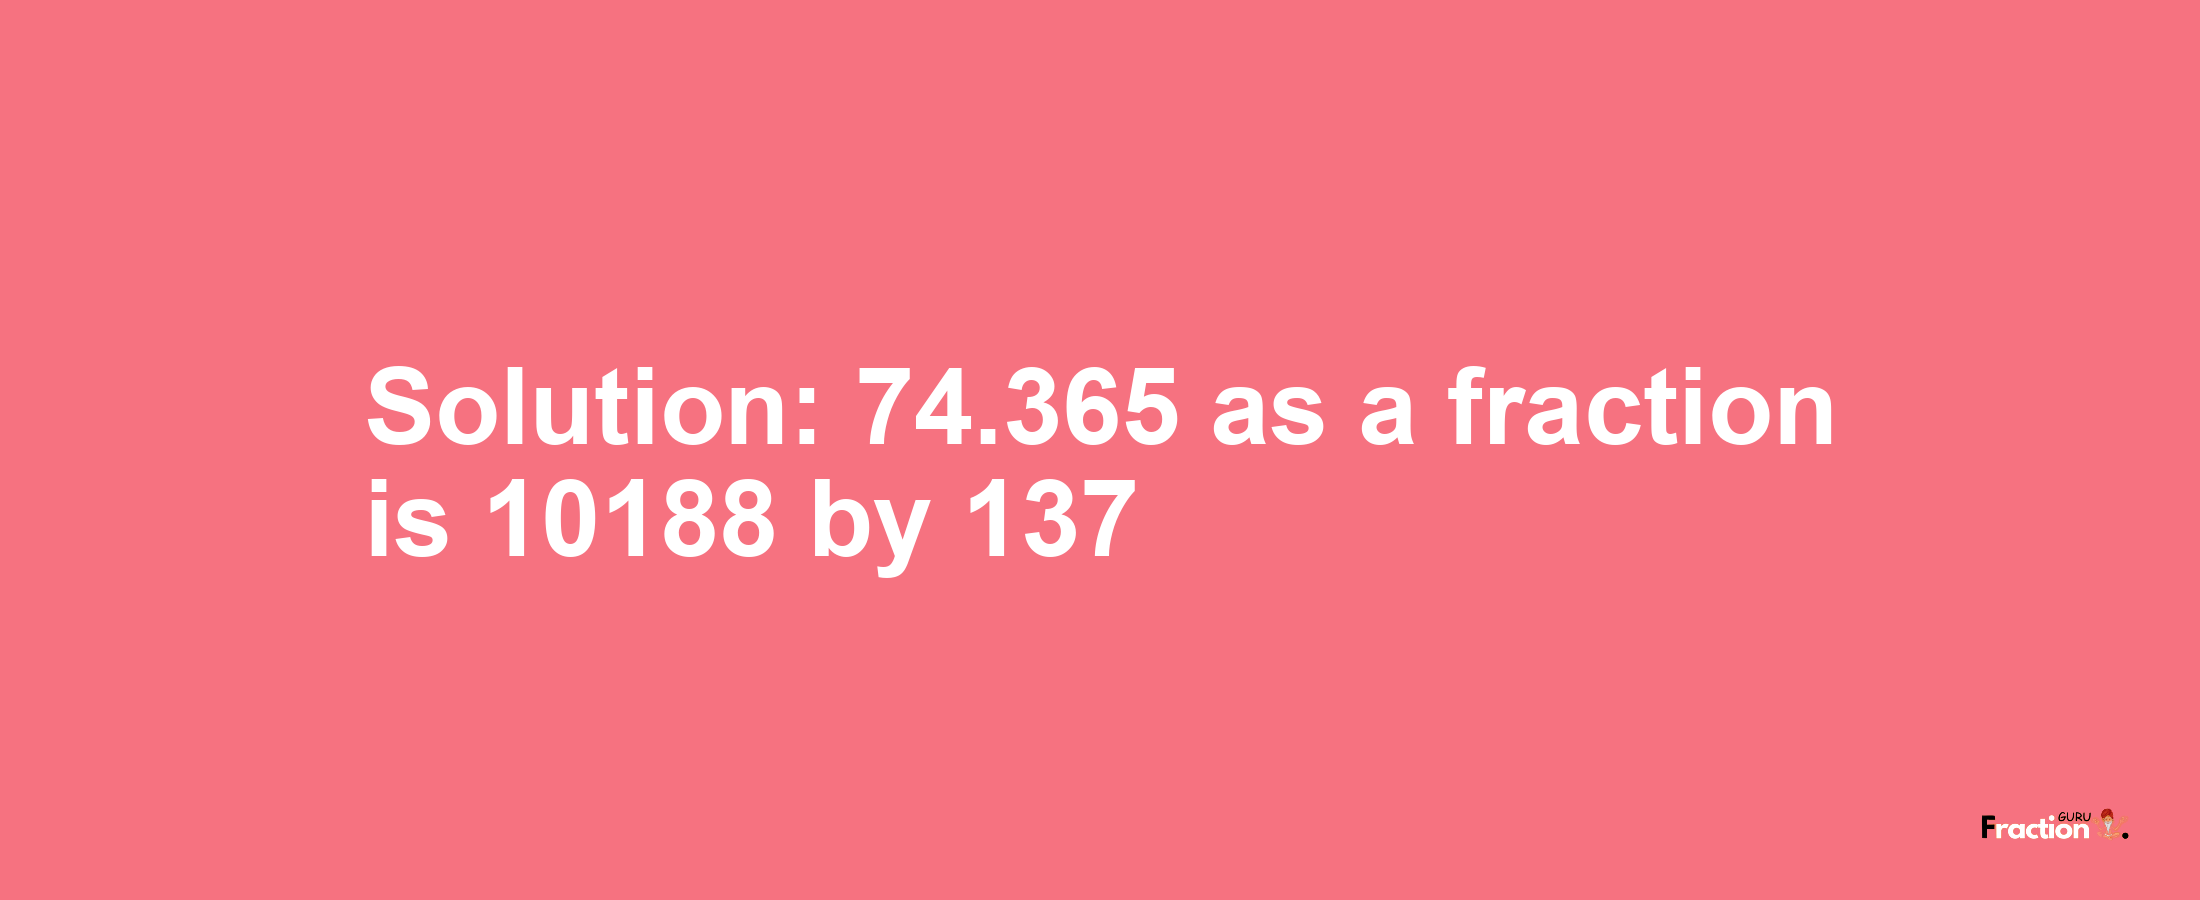 Solution:74.365 as a fraction is 10188/137